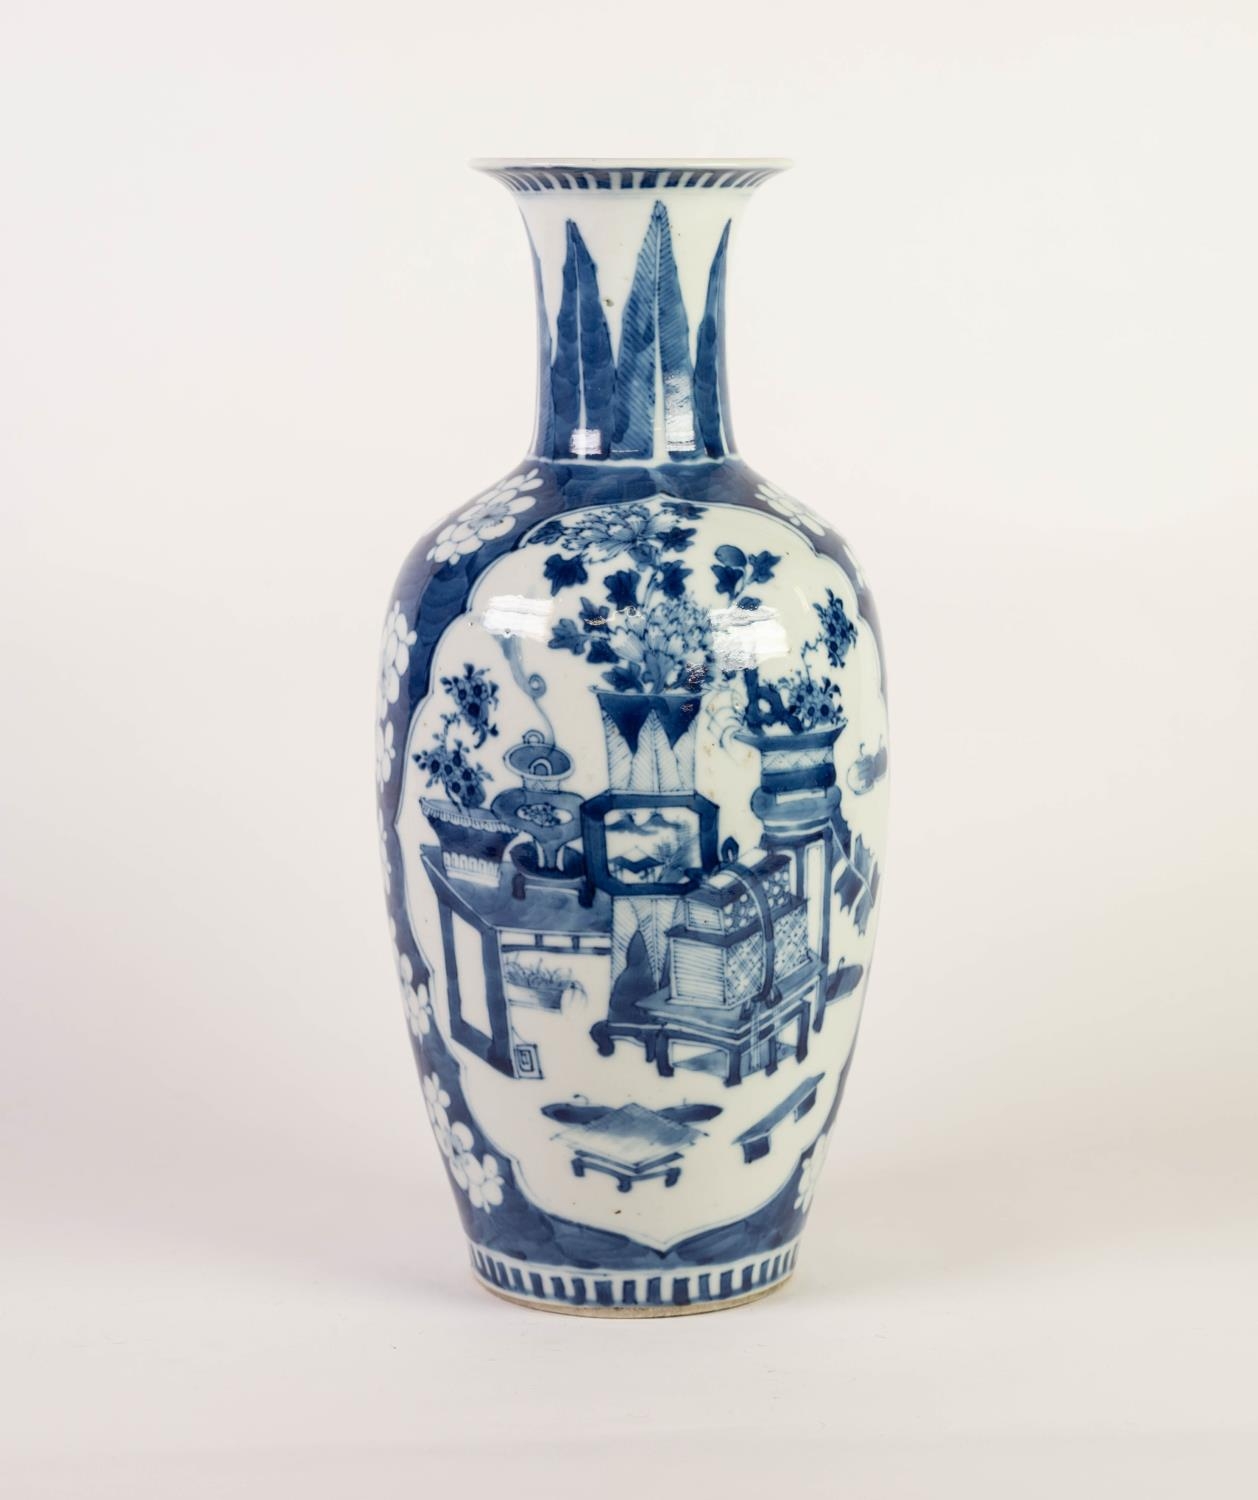 CHINESE LATE QING DYNASTY BLUE AND WHITE PORCELAIN VASE, of ovoid form with waisted neck, painted